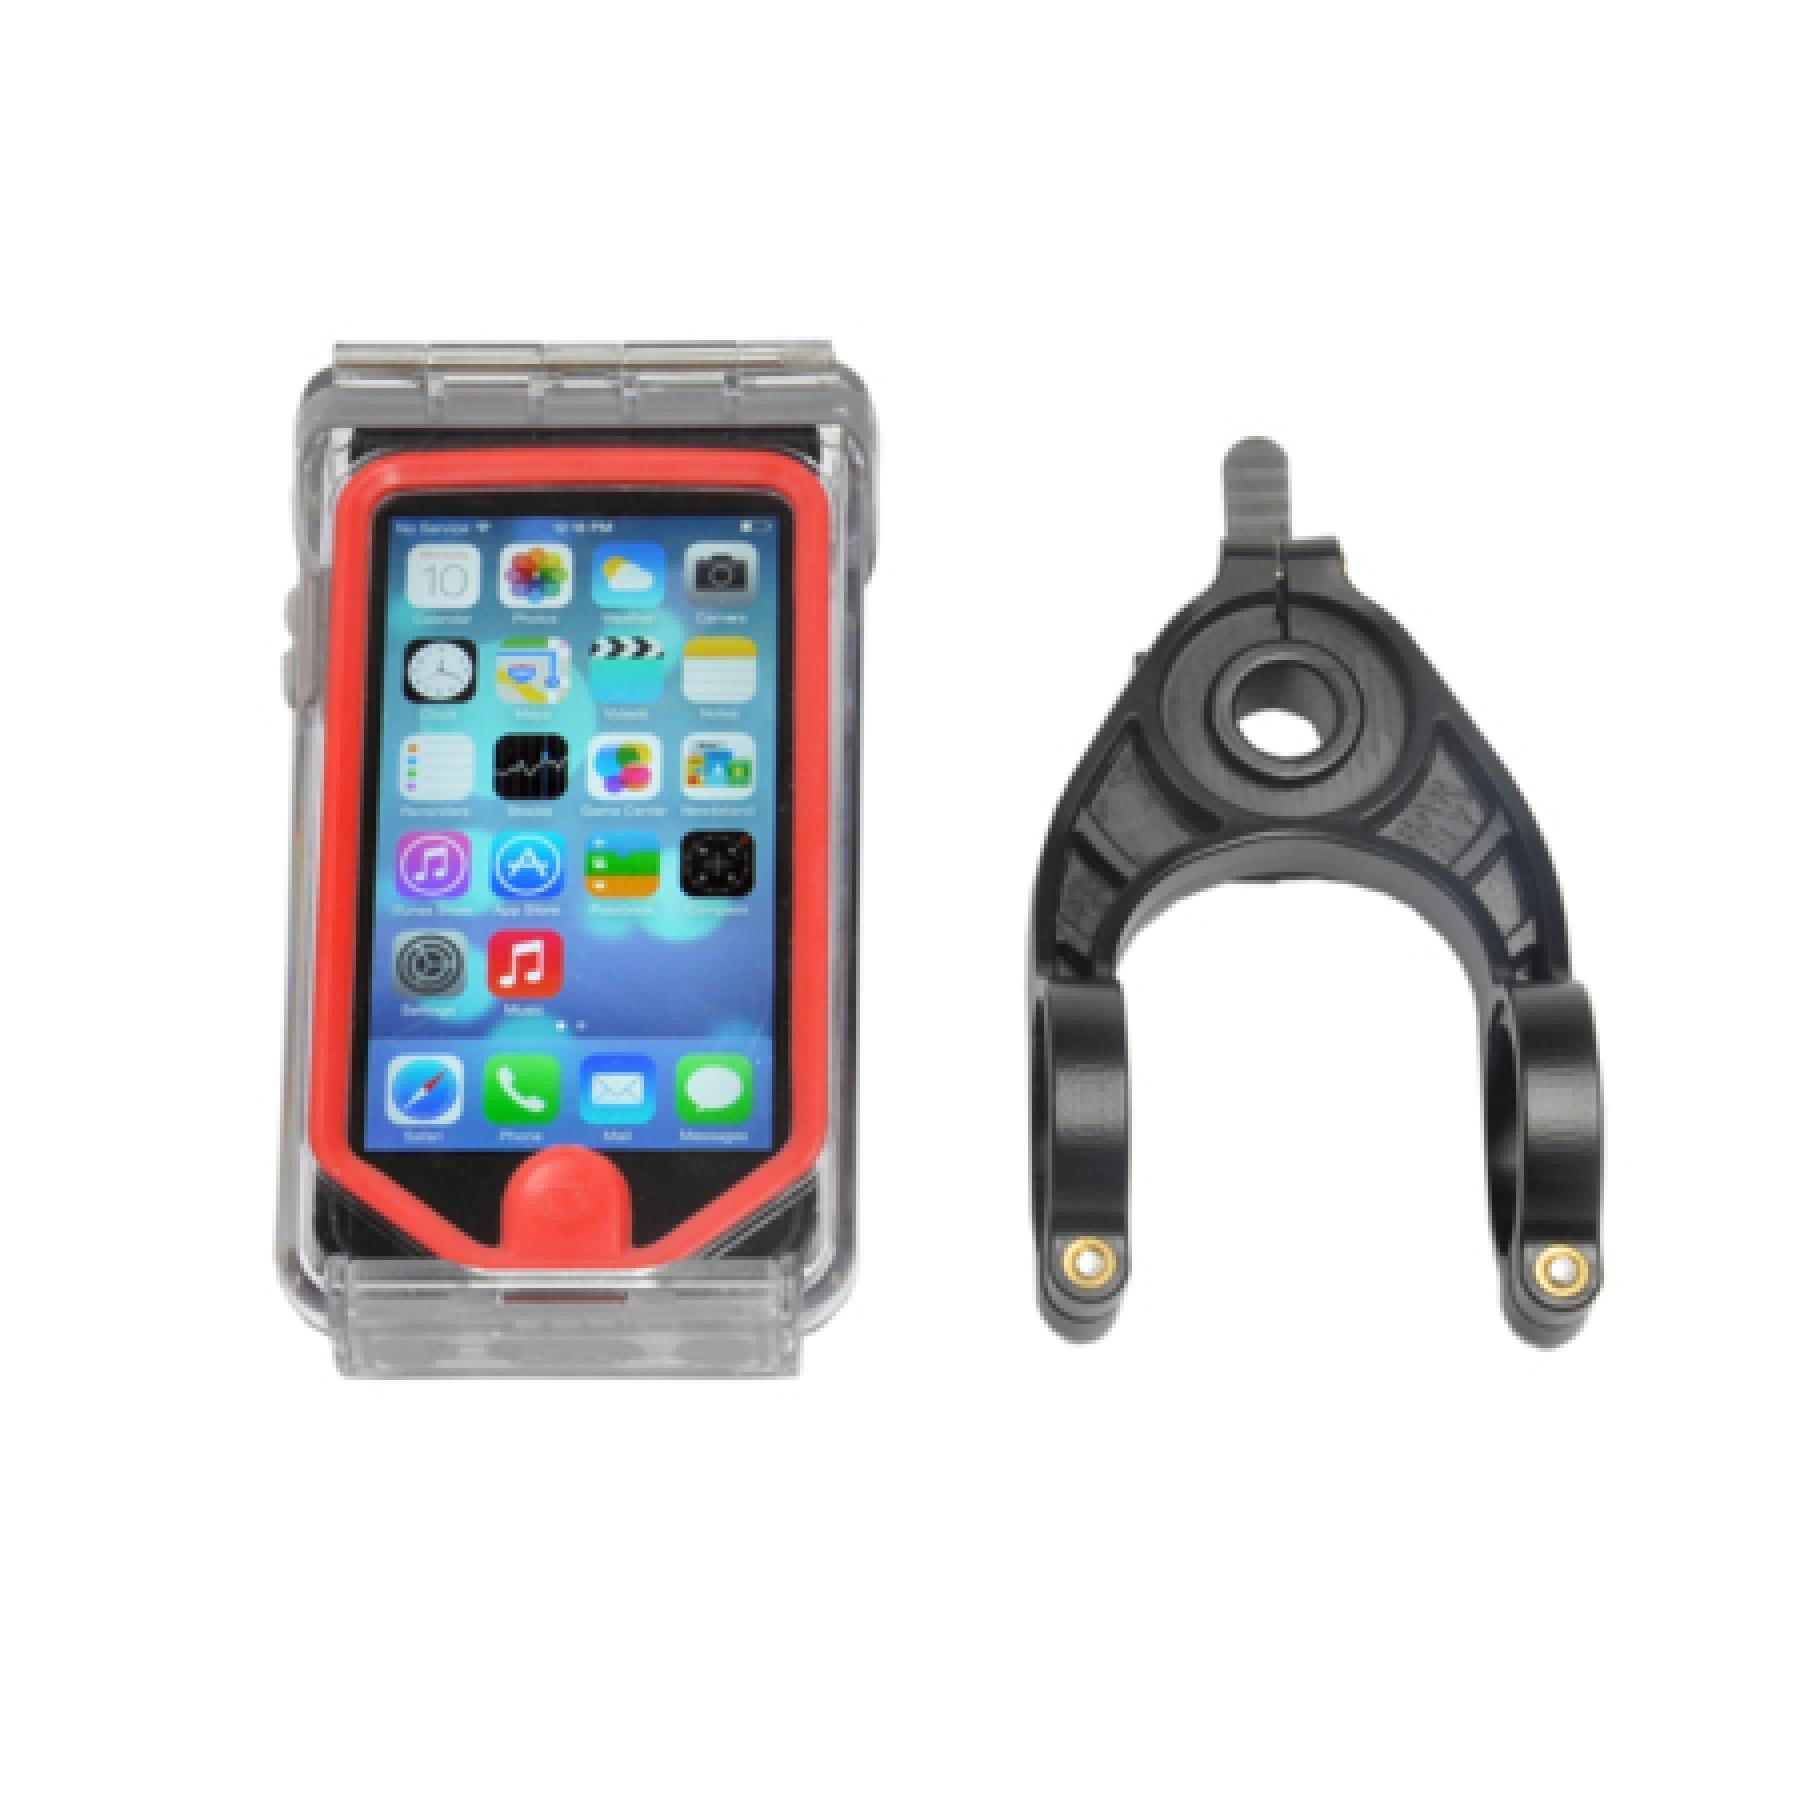 Porta telefono anteriore Barfly The Bar Fly pour iPhone 5/5S